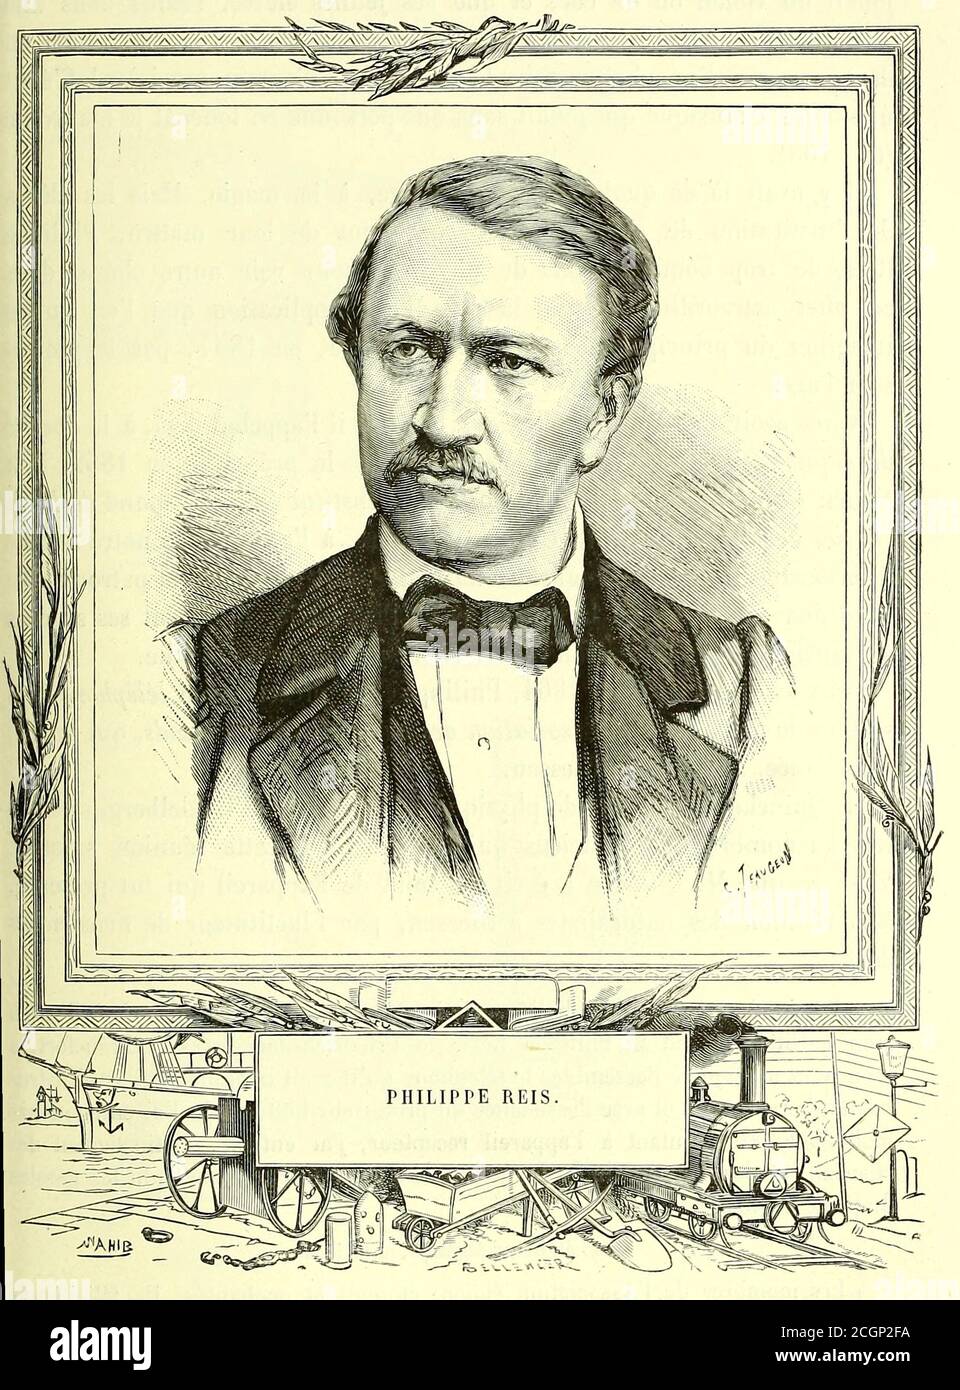 Johann Philipp Reis (January 7, 1834 – January 14, 1874) was a self-taught German scientist and inventor. In 1861, he constructed the first make-and-break telephone, today called the Reis telephone. From the Book Les merveilles de la science, ou Description populaire des inventions modernes [The Wonders of Science, or Popular Description of Modern Inventions] by Figuier, Louis, 1819-1894 Published in Paris 1867 Stock Photo